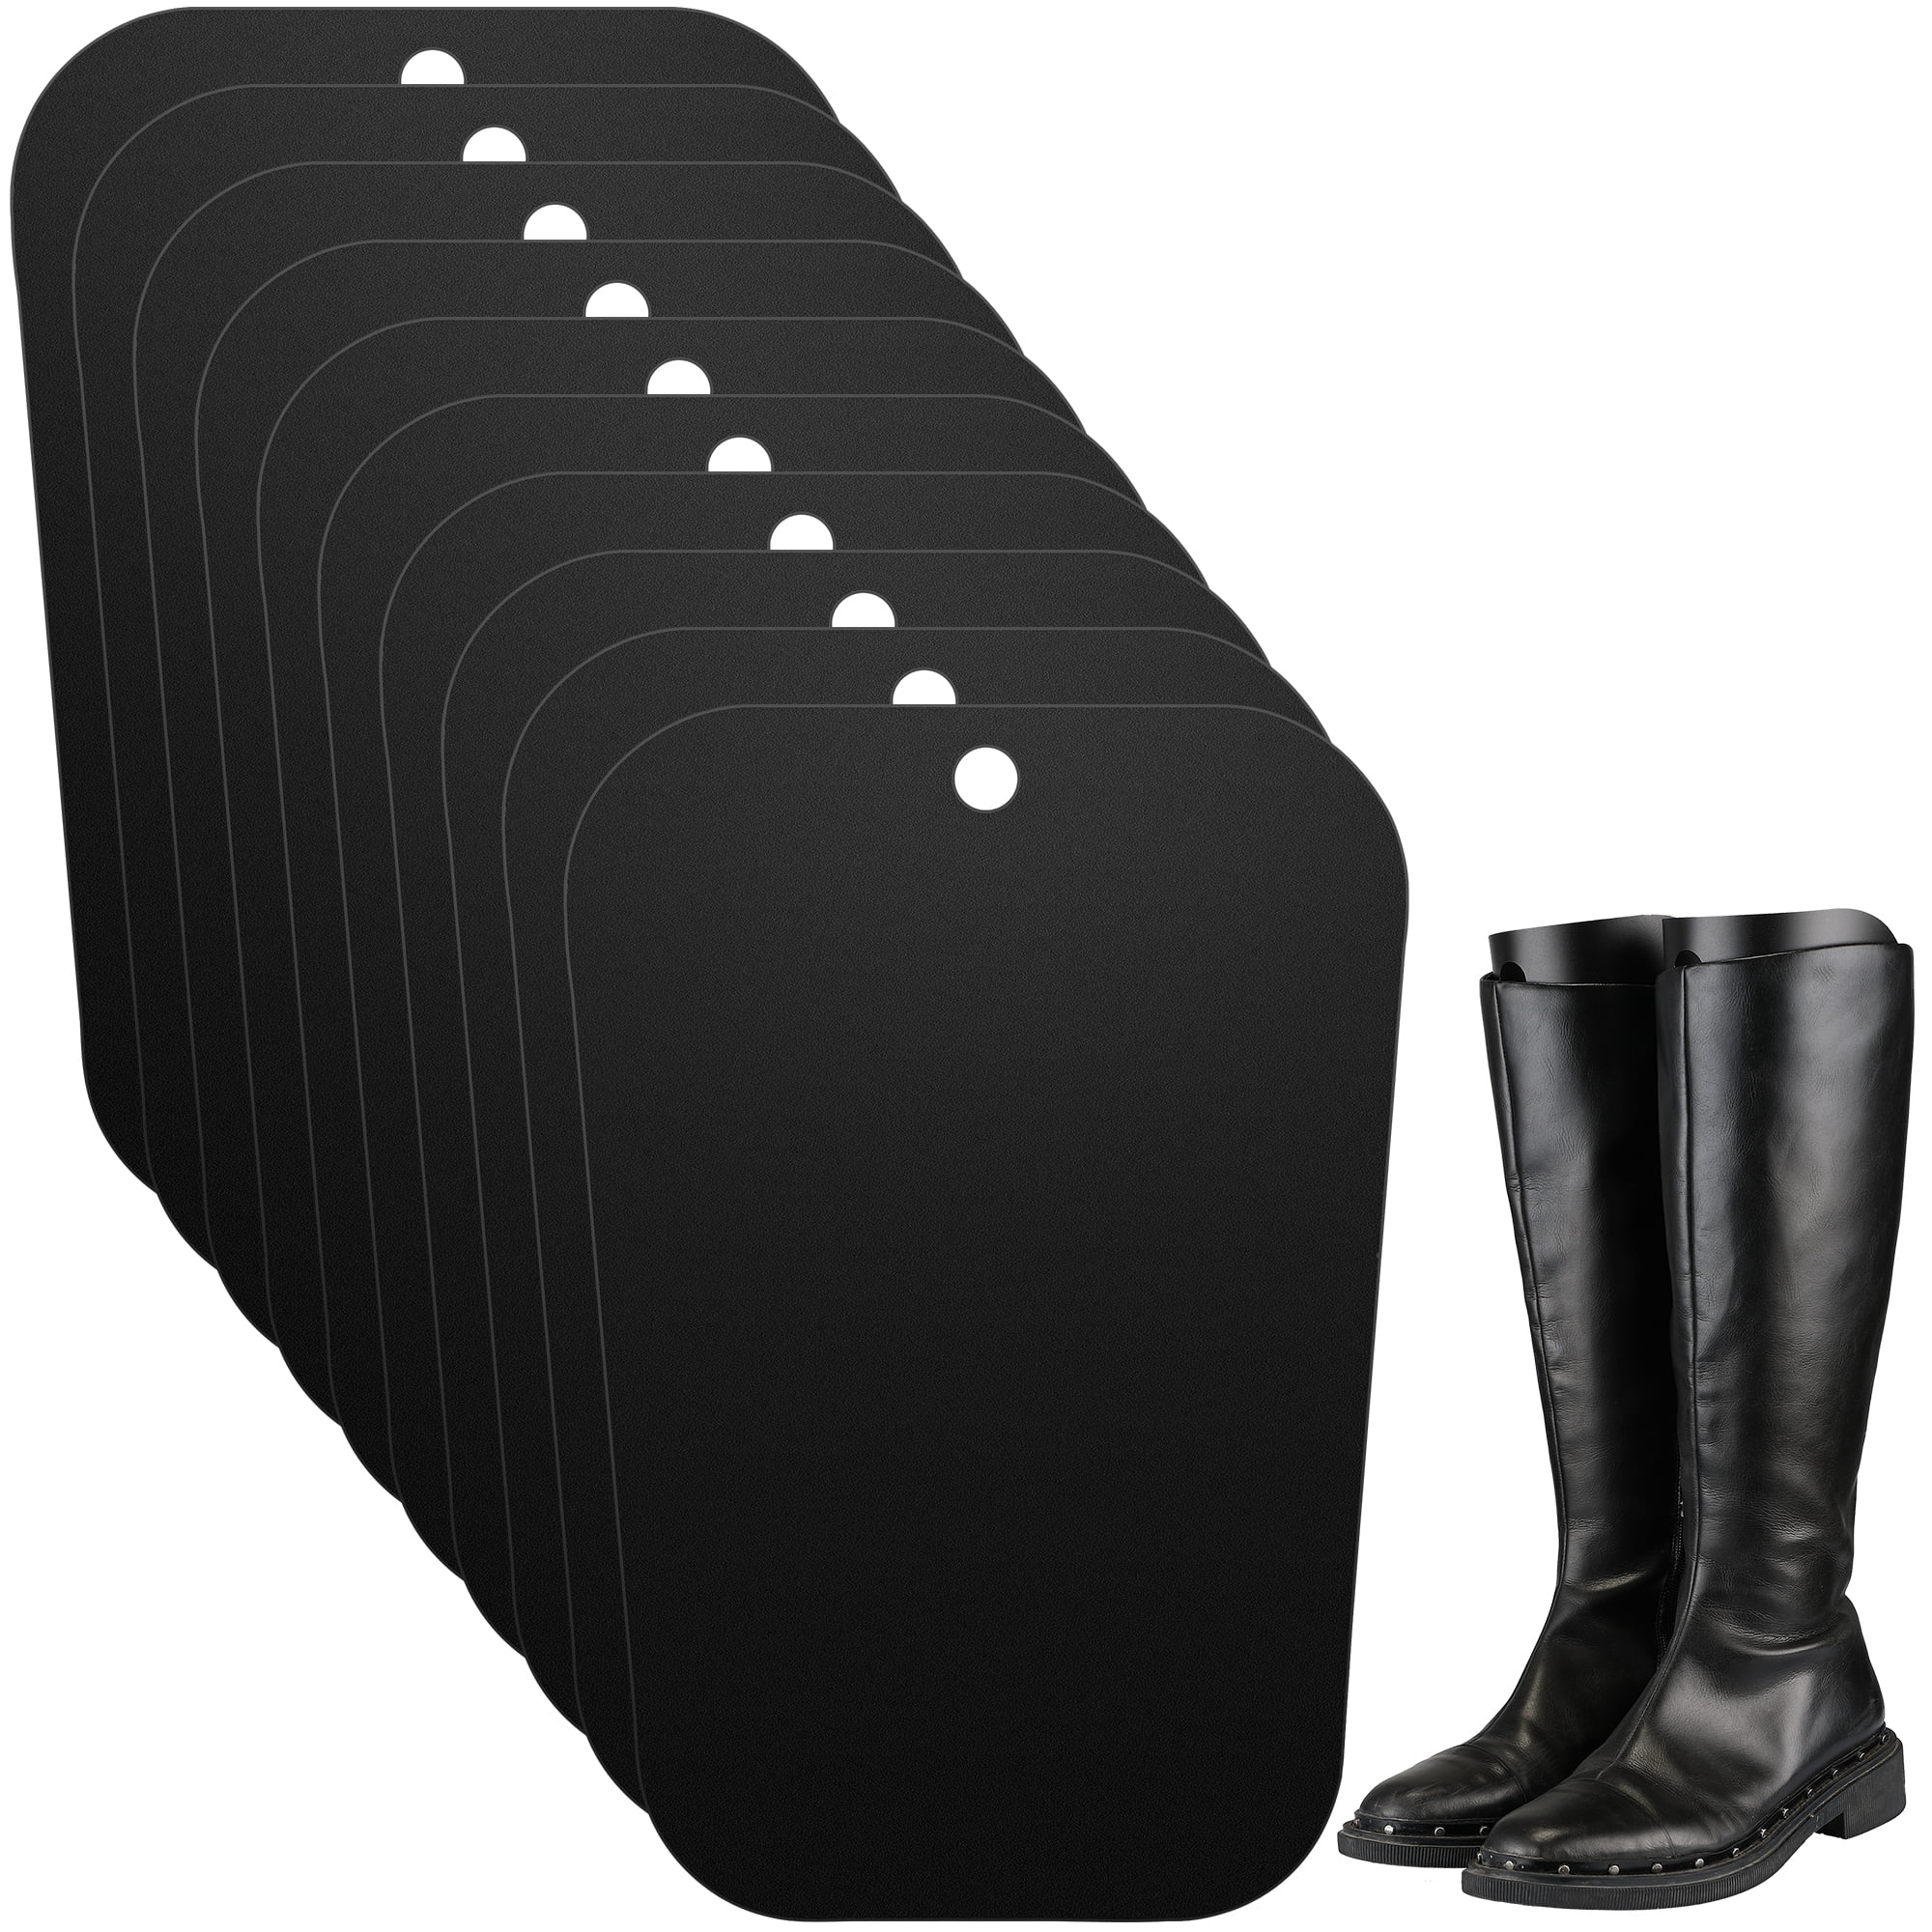 Pairs of Automatic Boot Trees Plastic Black Knee High Tall Boots Stand Holder Support Black 16x13in 